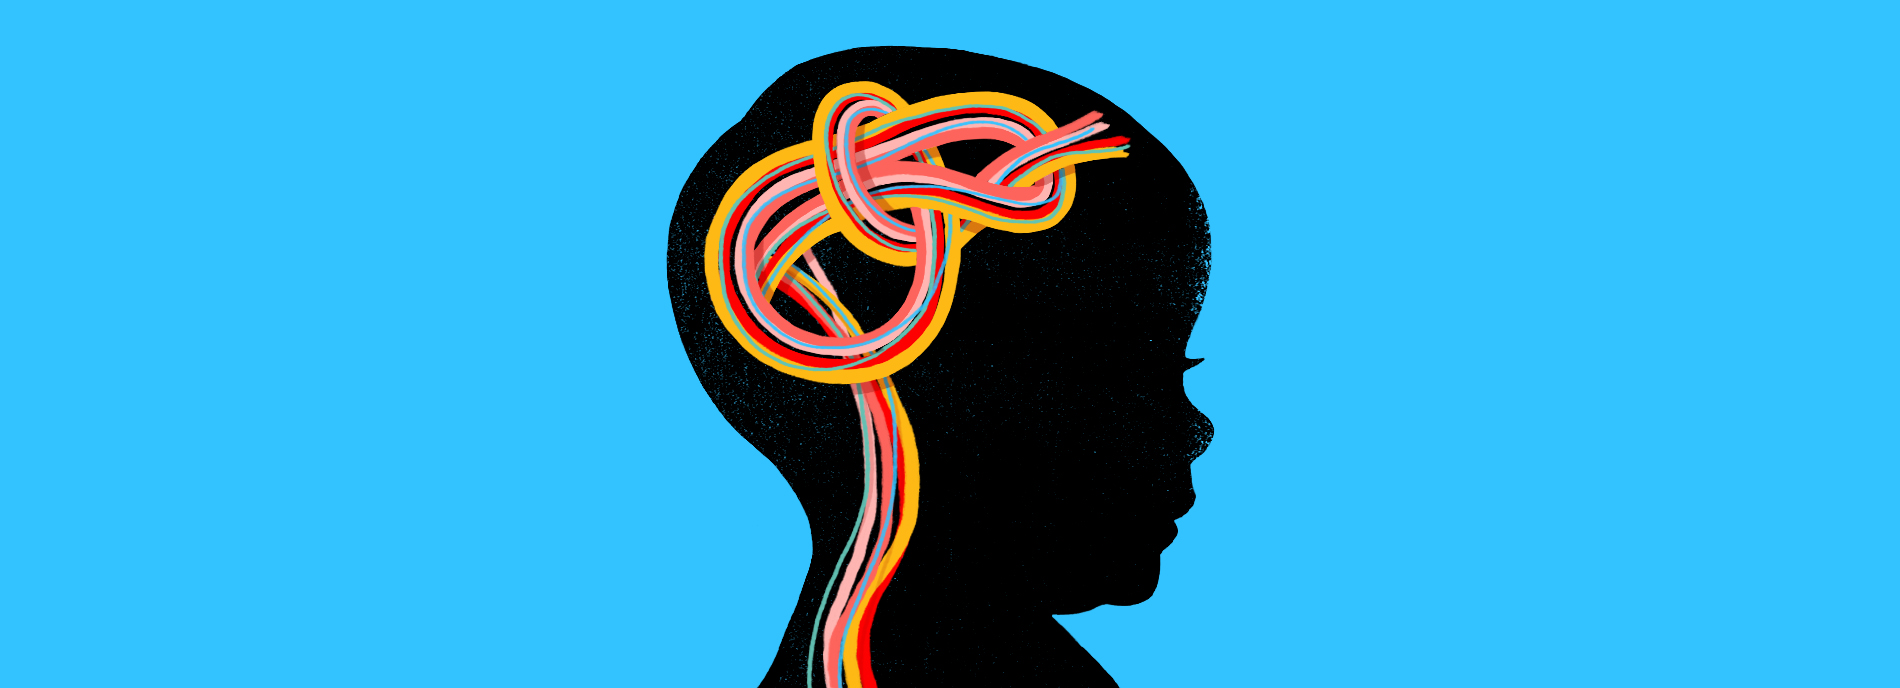 Illustration of child's silhouette with brain as a colorful knot.